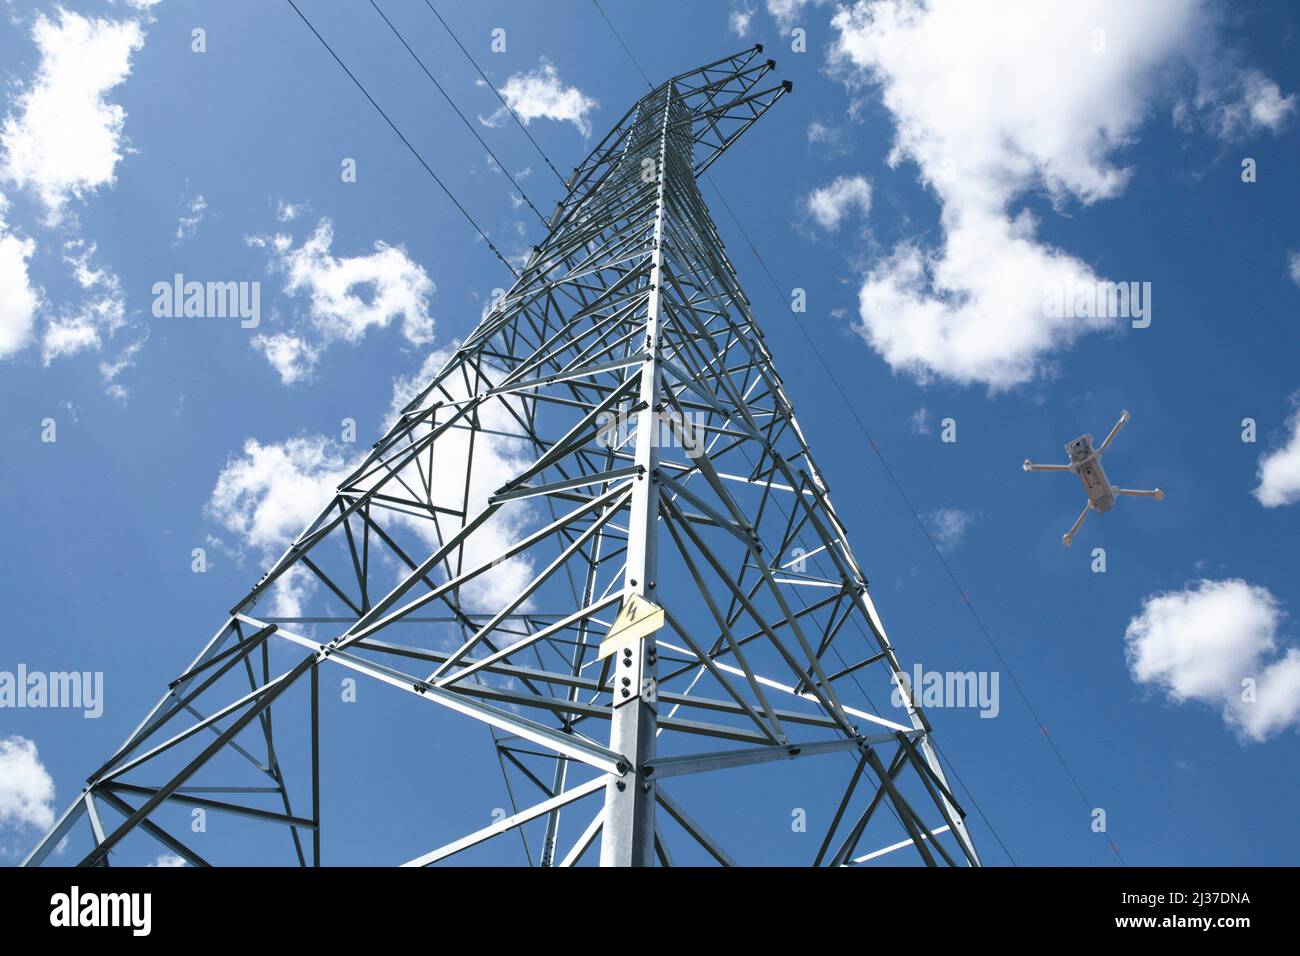 Dron flying over stell electricity pylon. Drones for power line inspection concept. Stock Photo